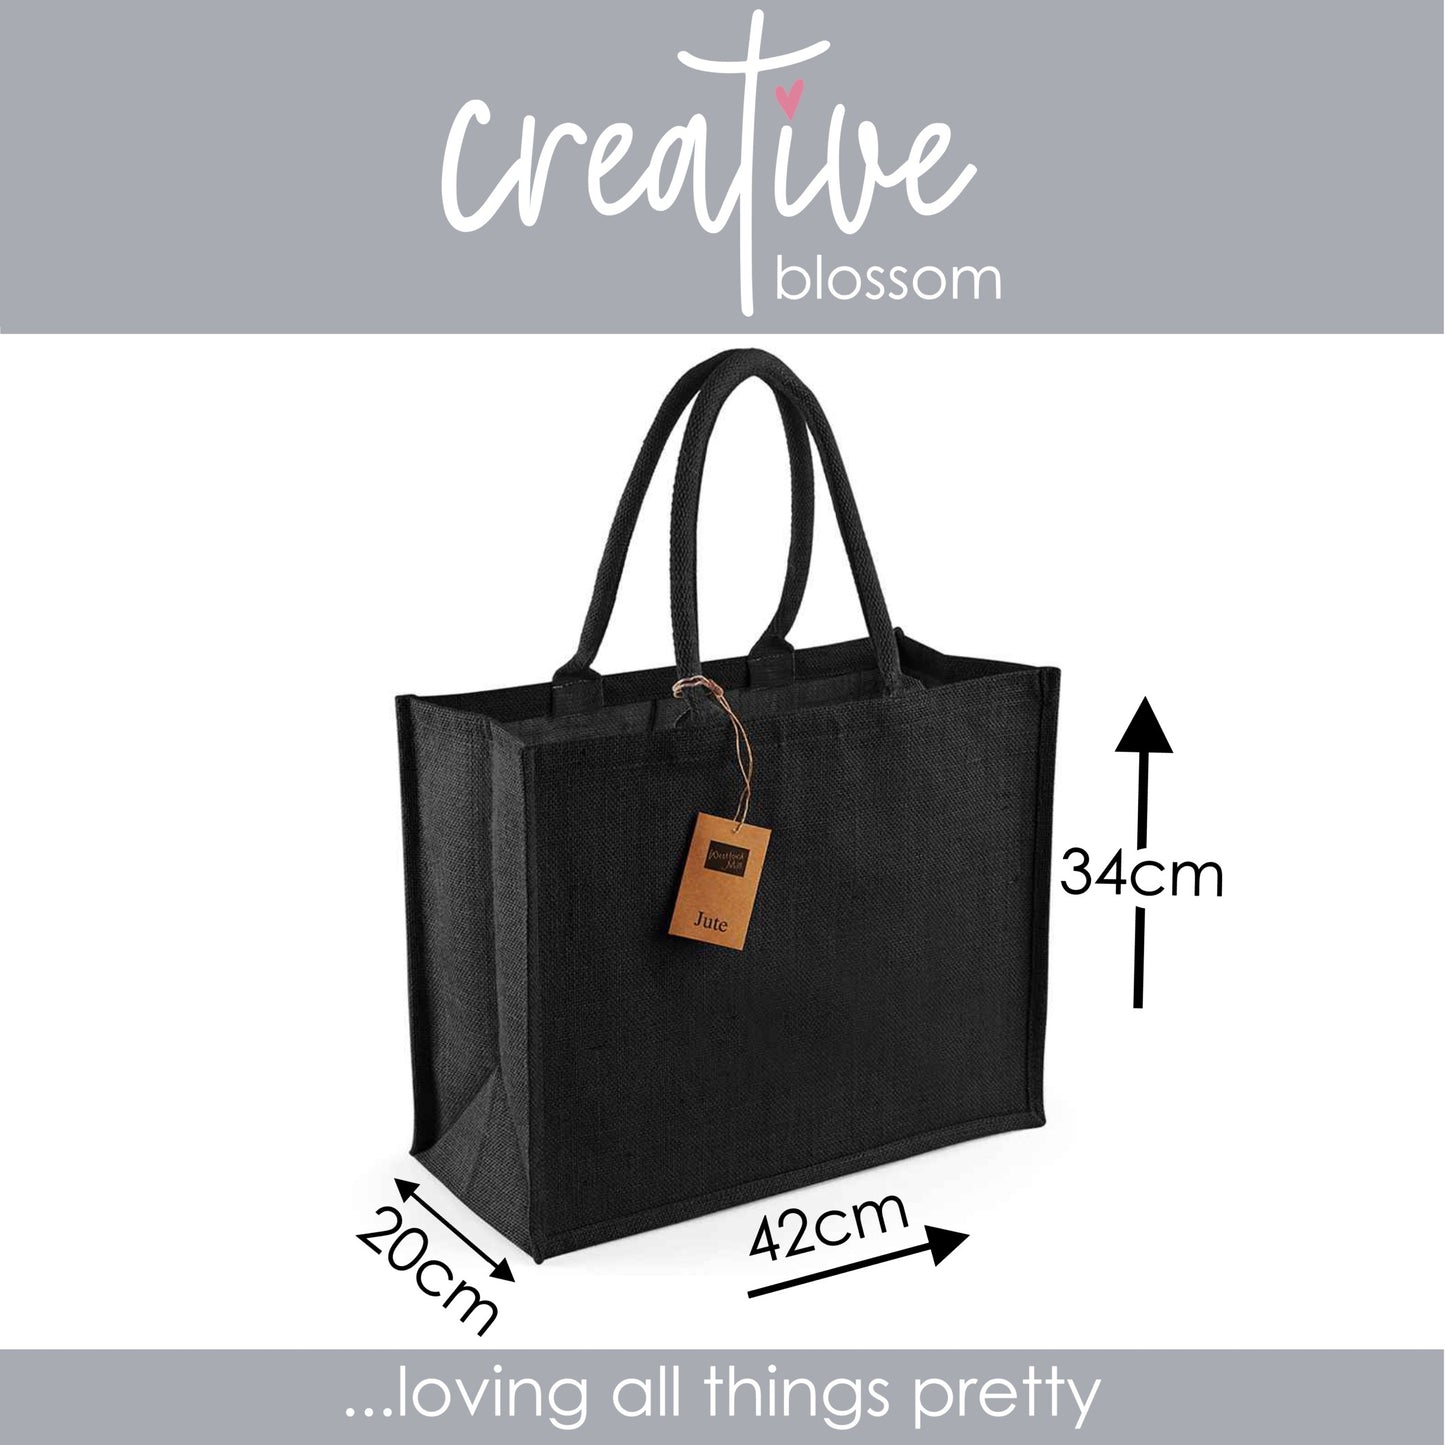 NEW - Embroidered Finest... Black tote Bag